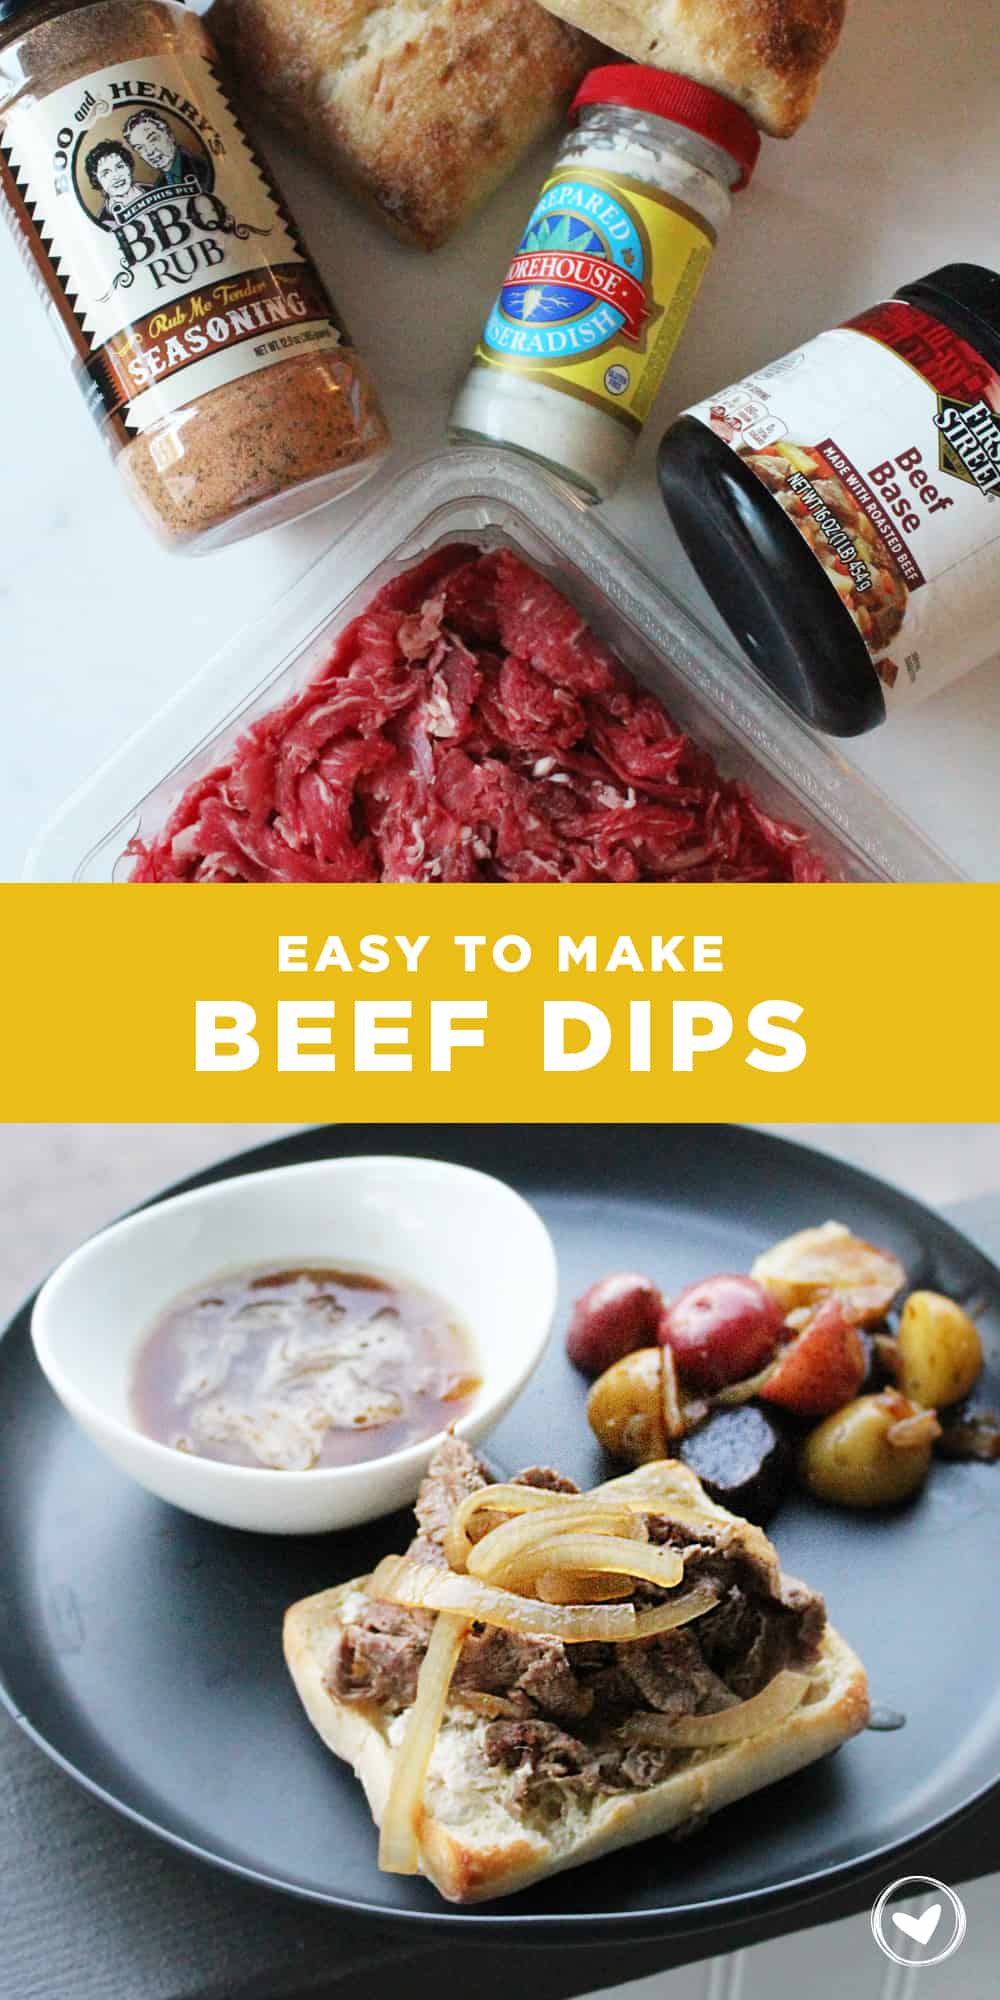 Easy to Make Beef Dips